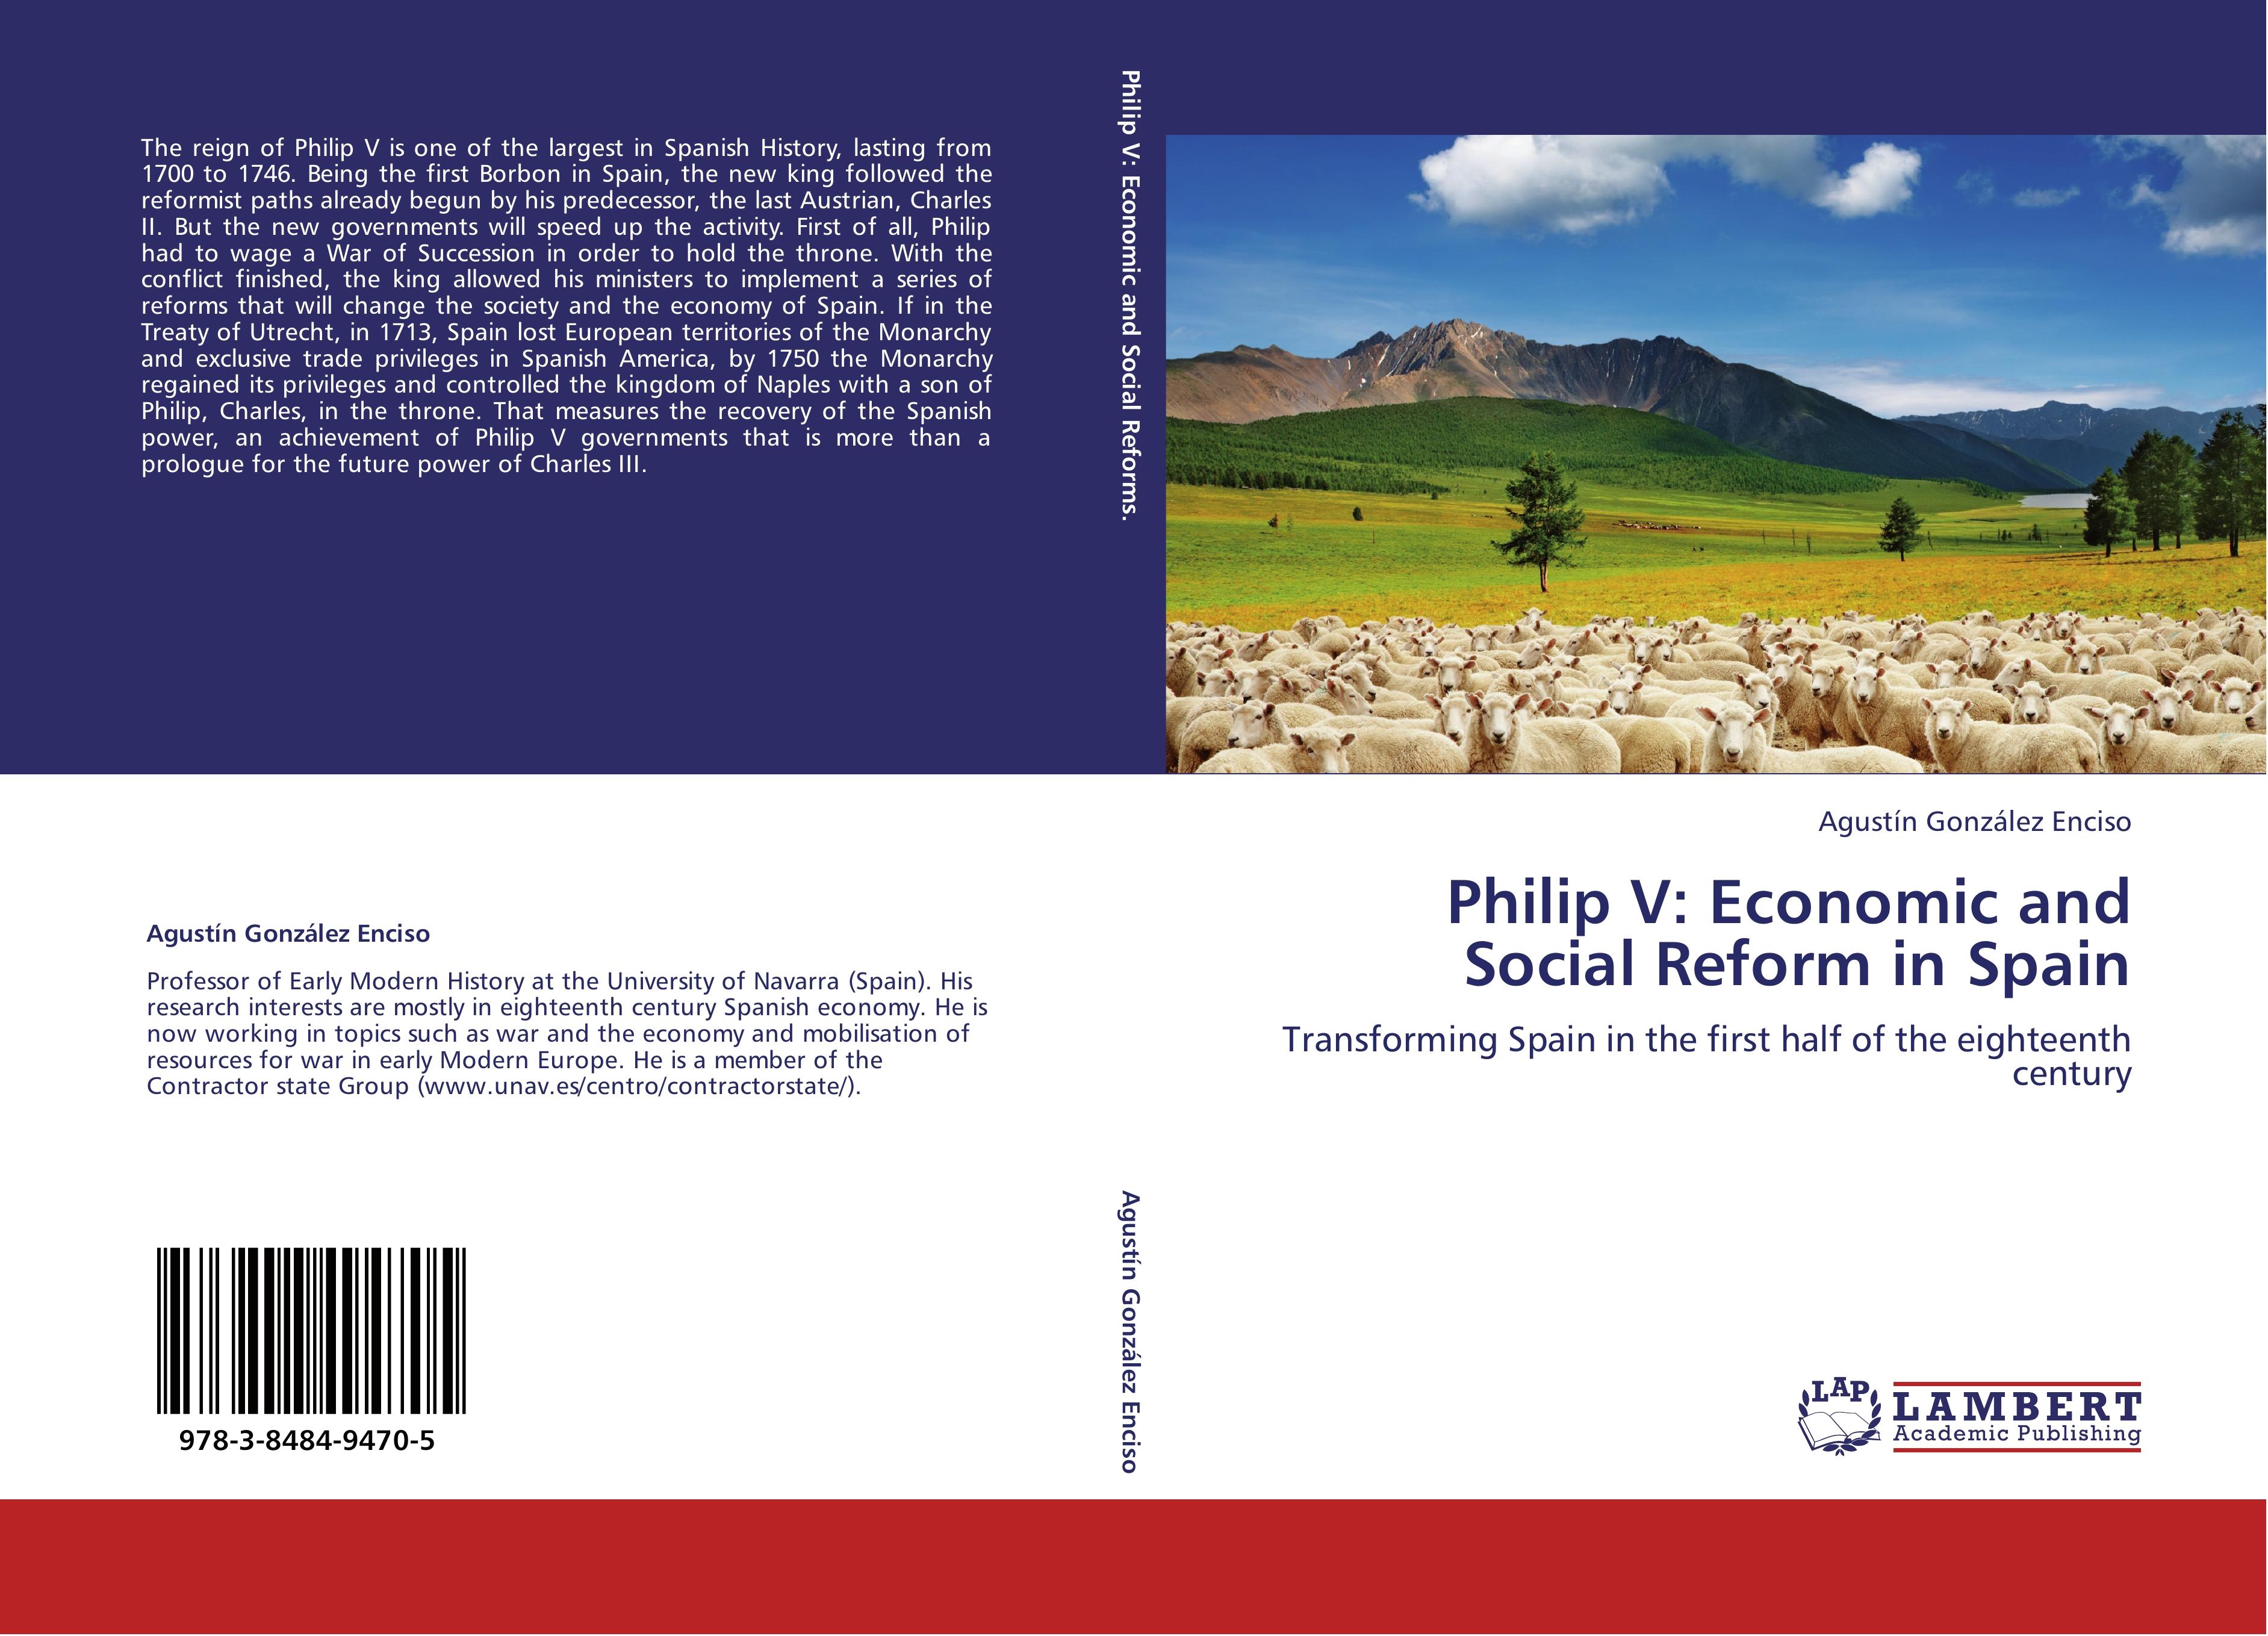 Philip V: Economic and Social Reform in Spain / Transforming Spain in the first half of the eighteenth century / Agustín González Enciso / Taschenbuch / Paperback / 148 S. / Englisch / 2012 - González Enciso, Agustín